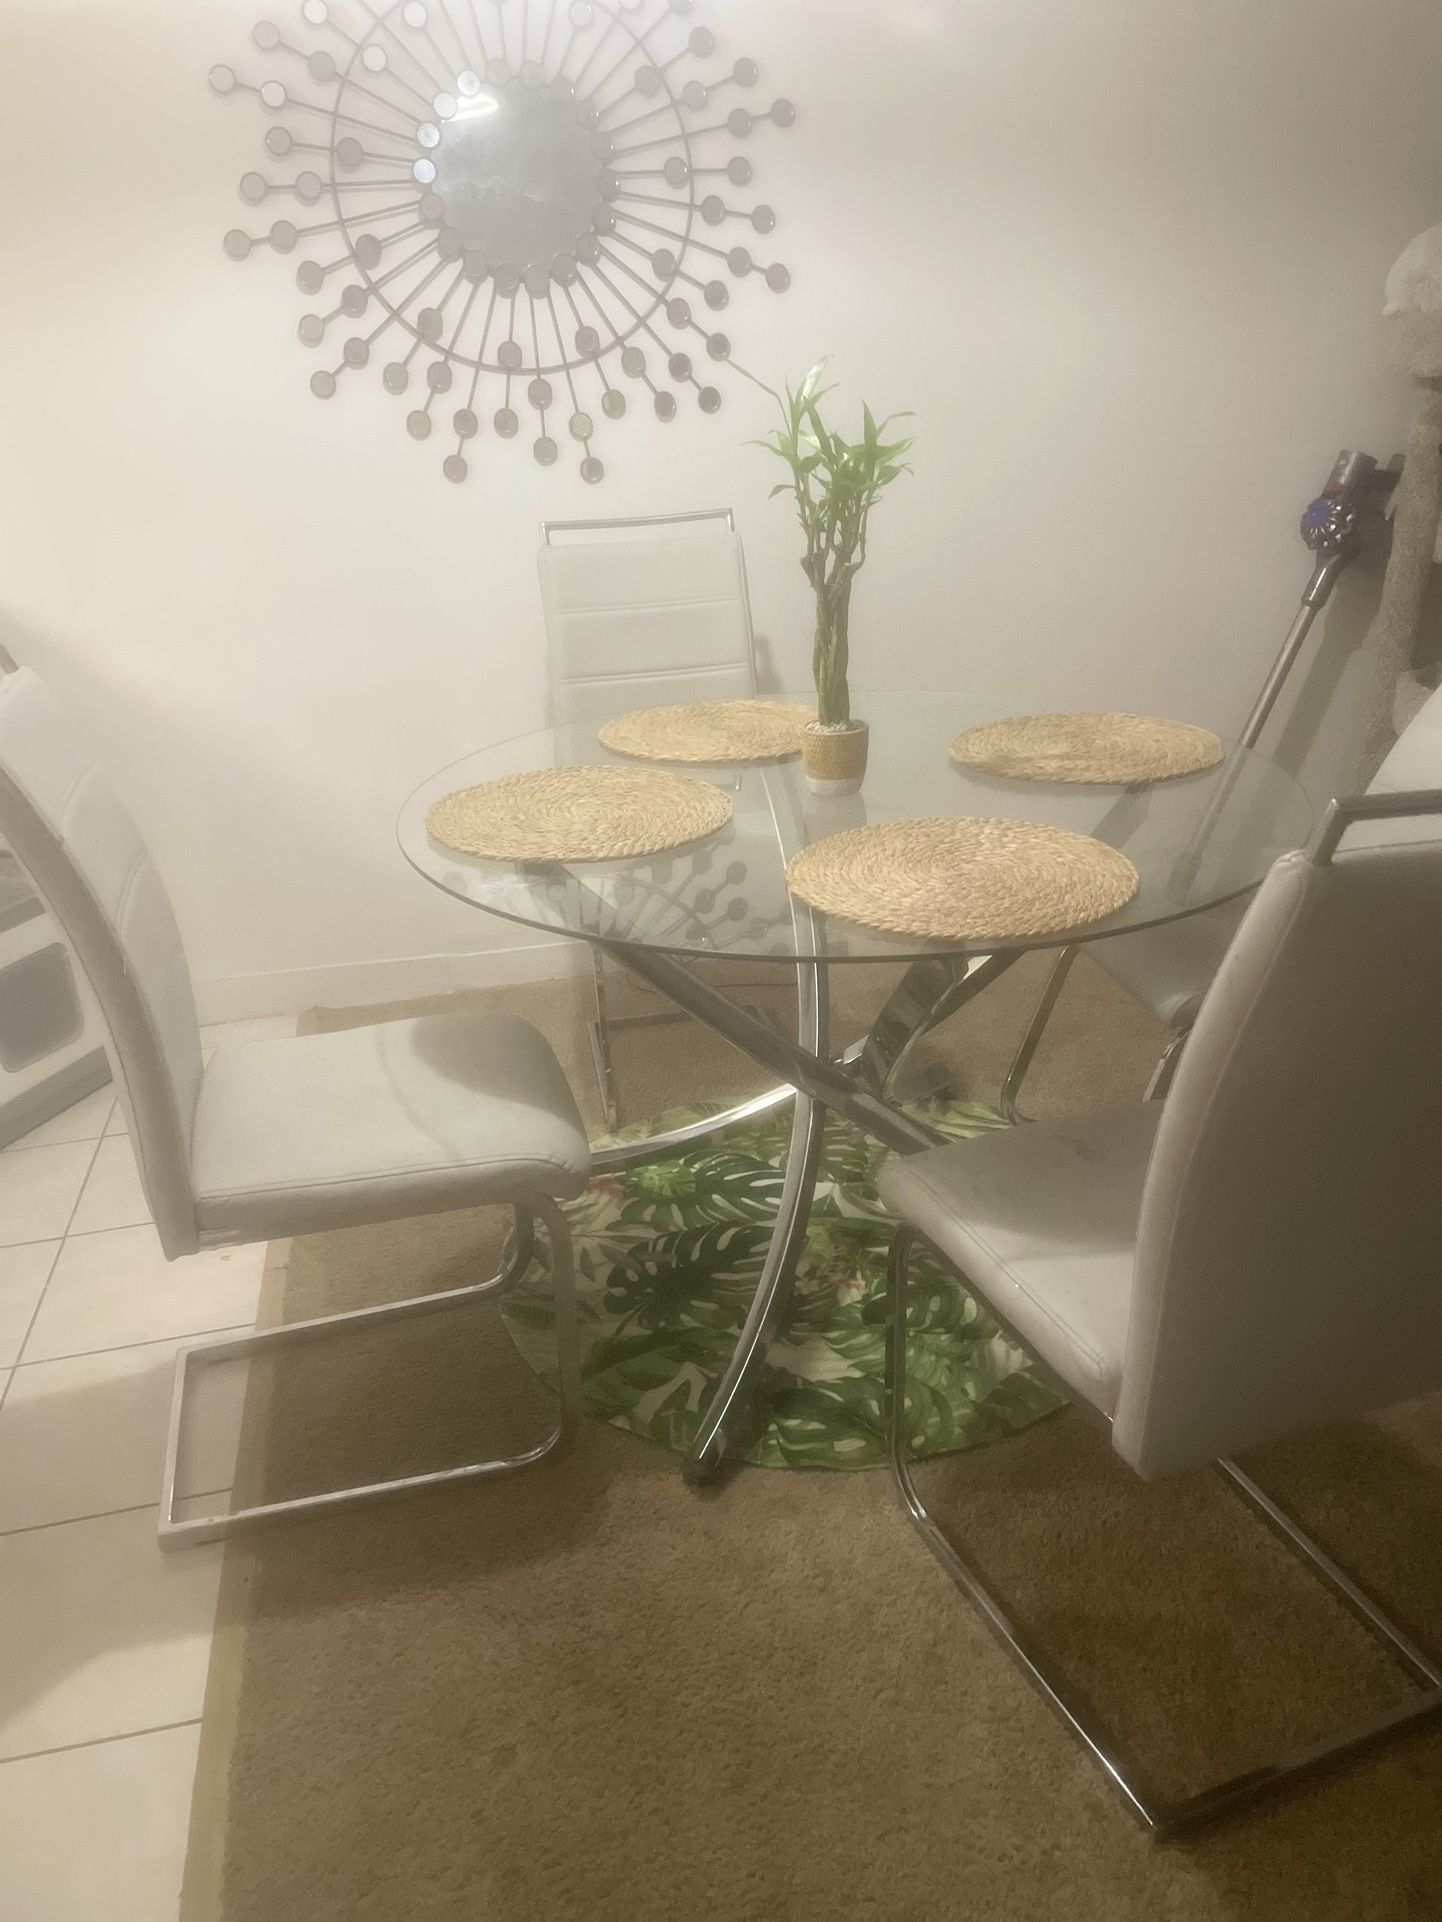 Dinning Table And Chairs Set/ Glass Mirror Home Decor/ Green Plant Rug $200